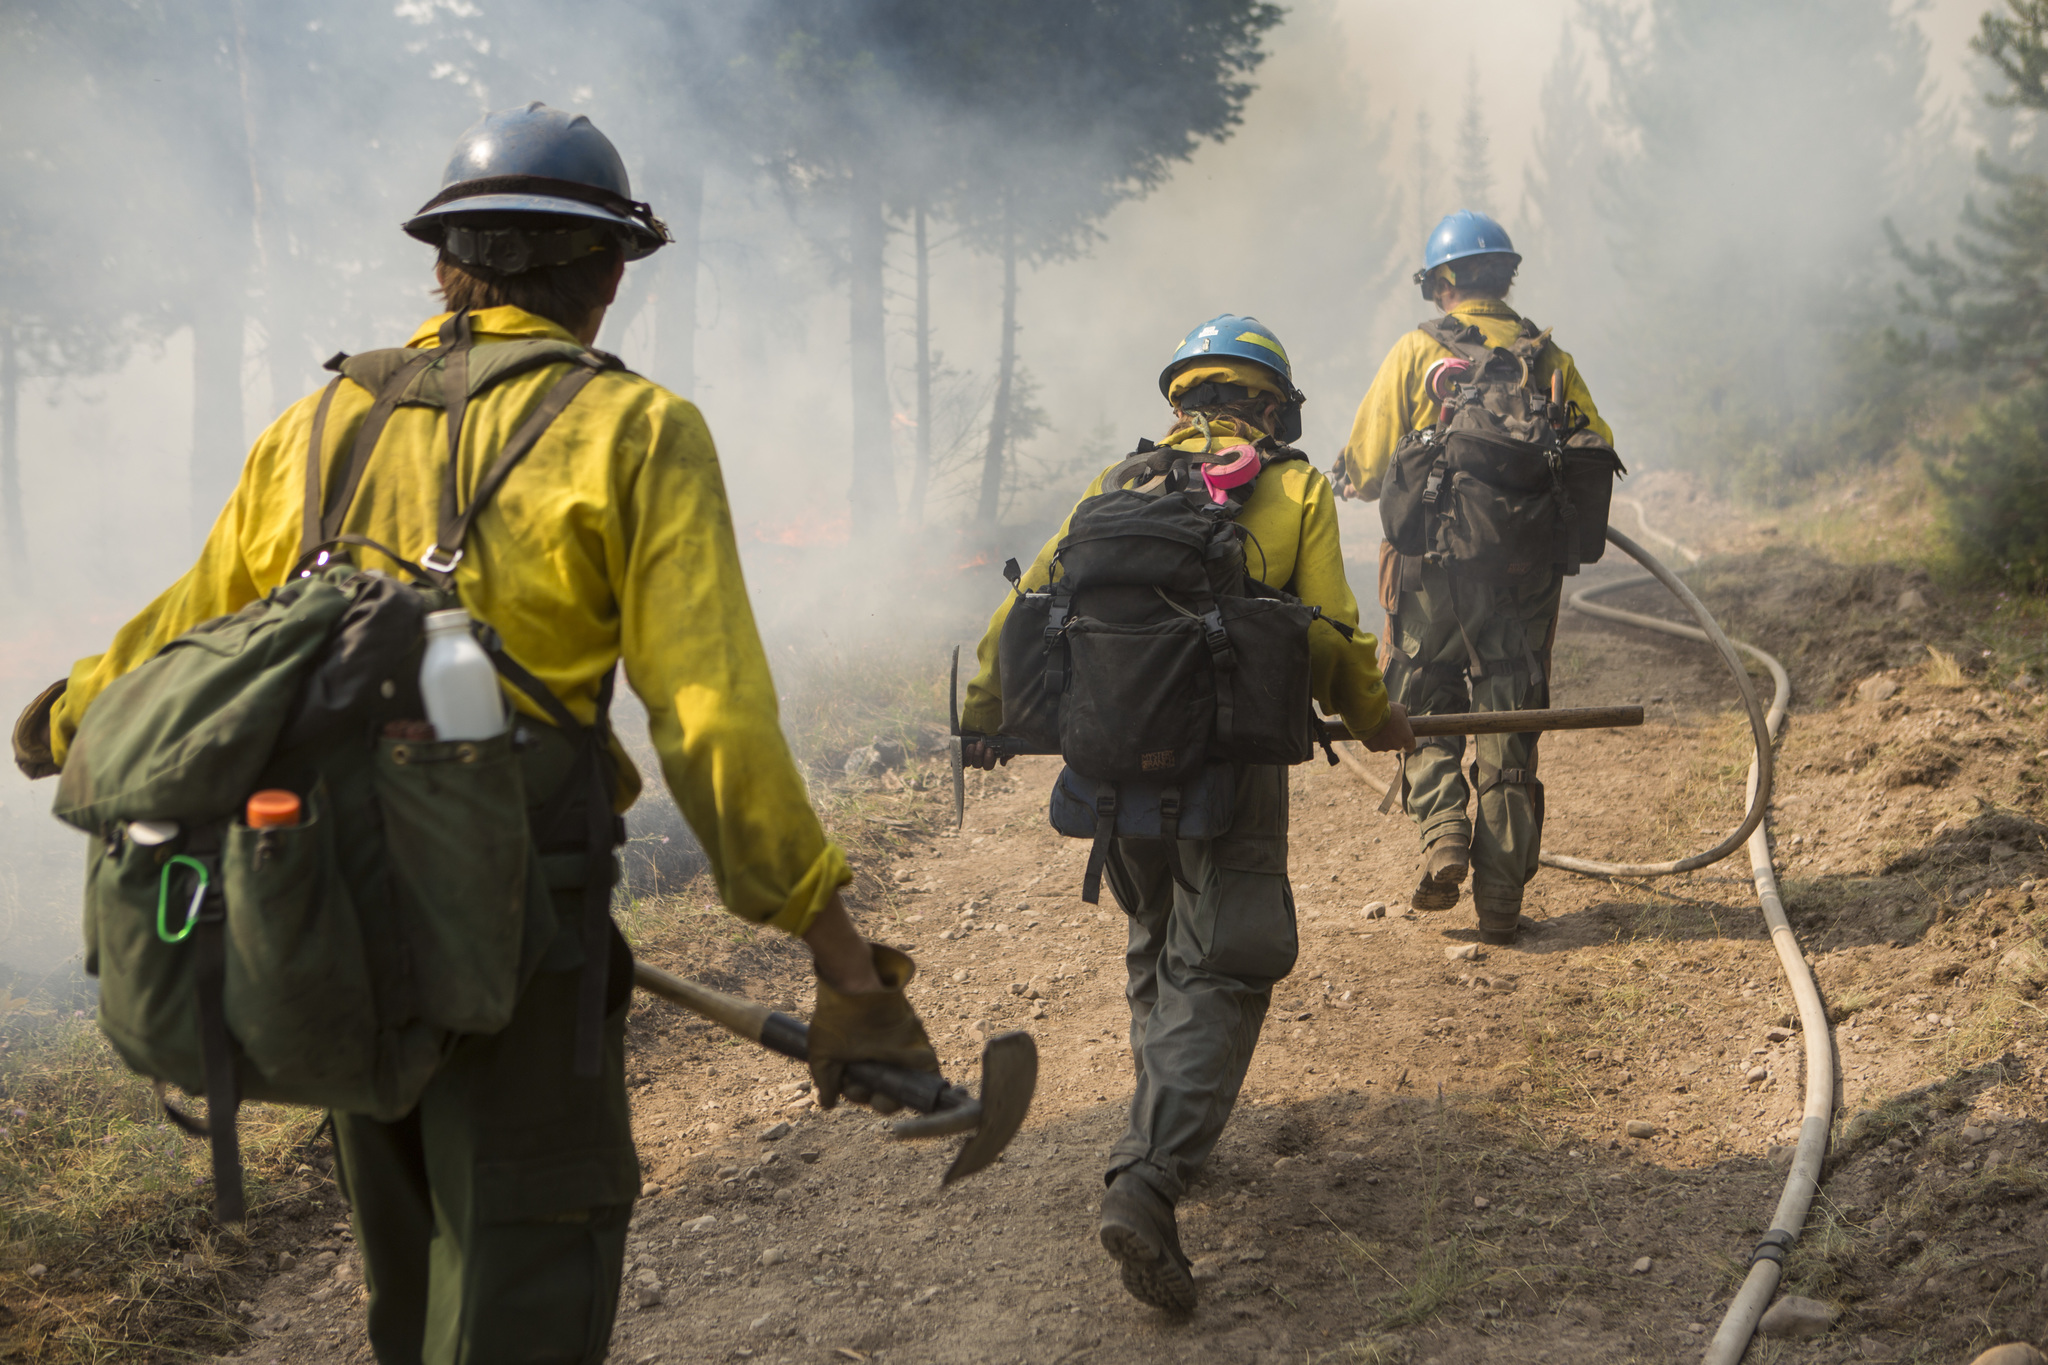 Three wildland firefighters walking along a cleared fire break, the first firefighter carring a fire hose.